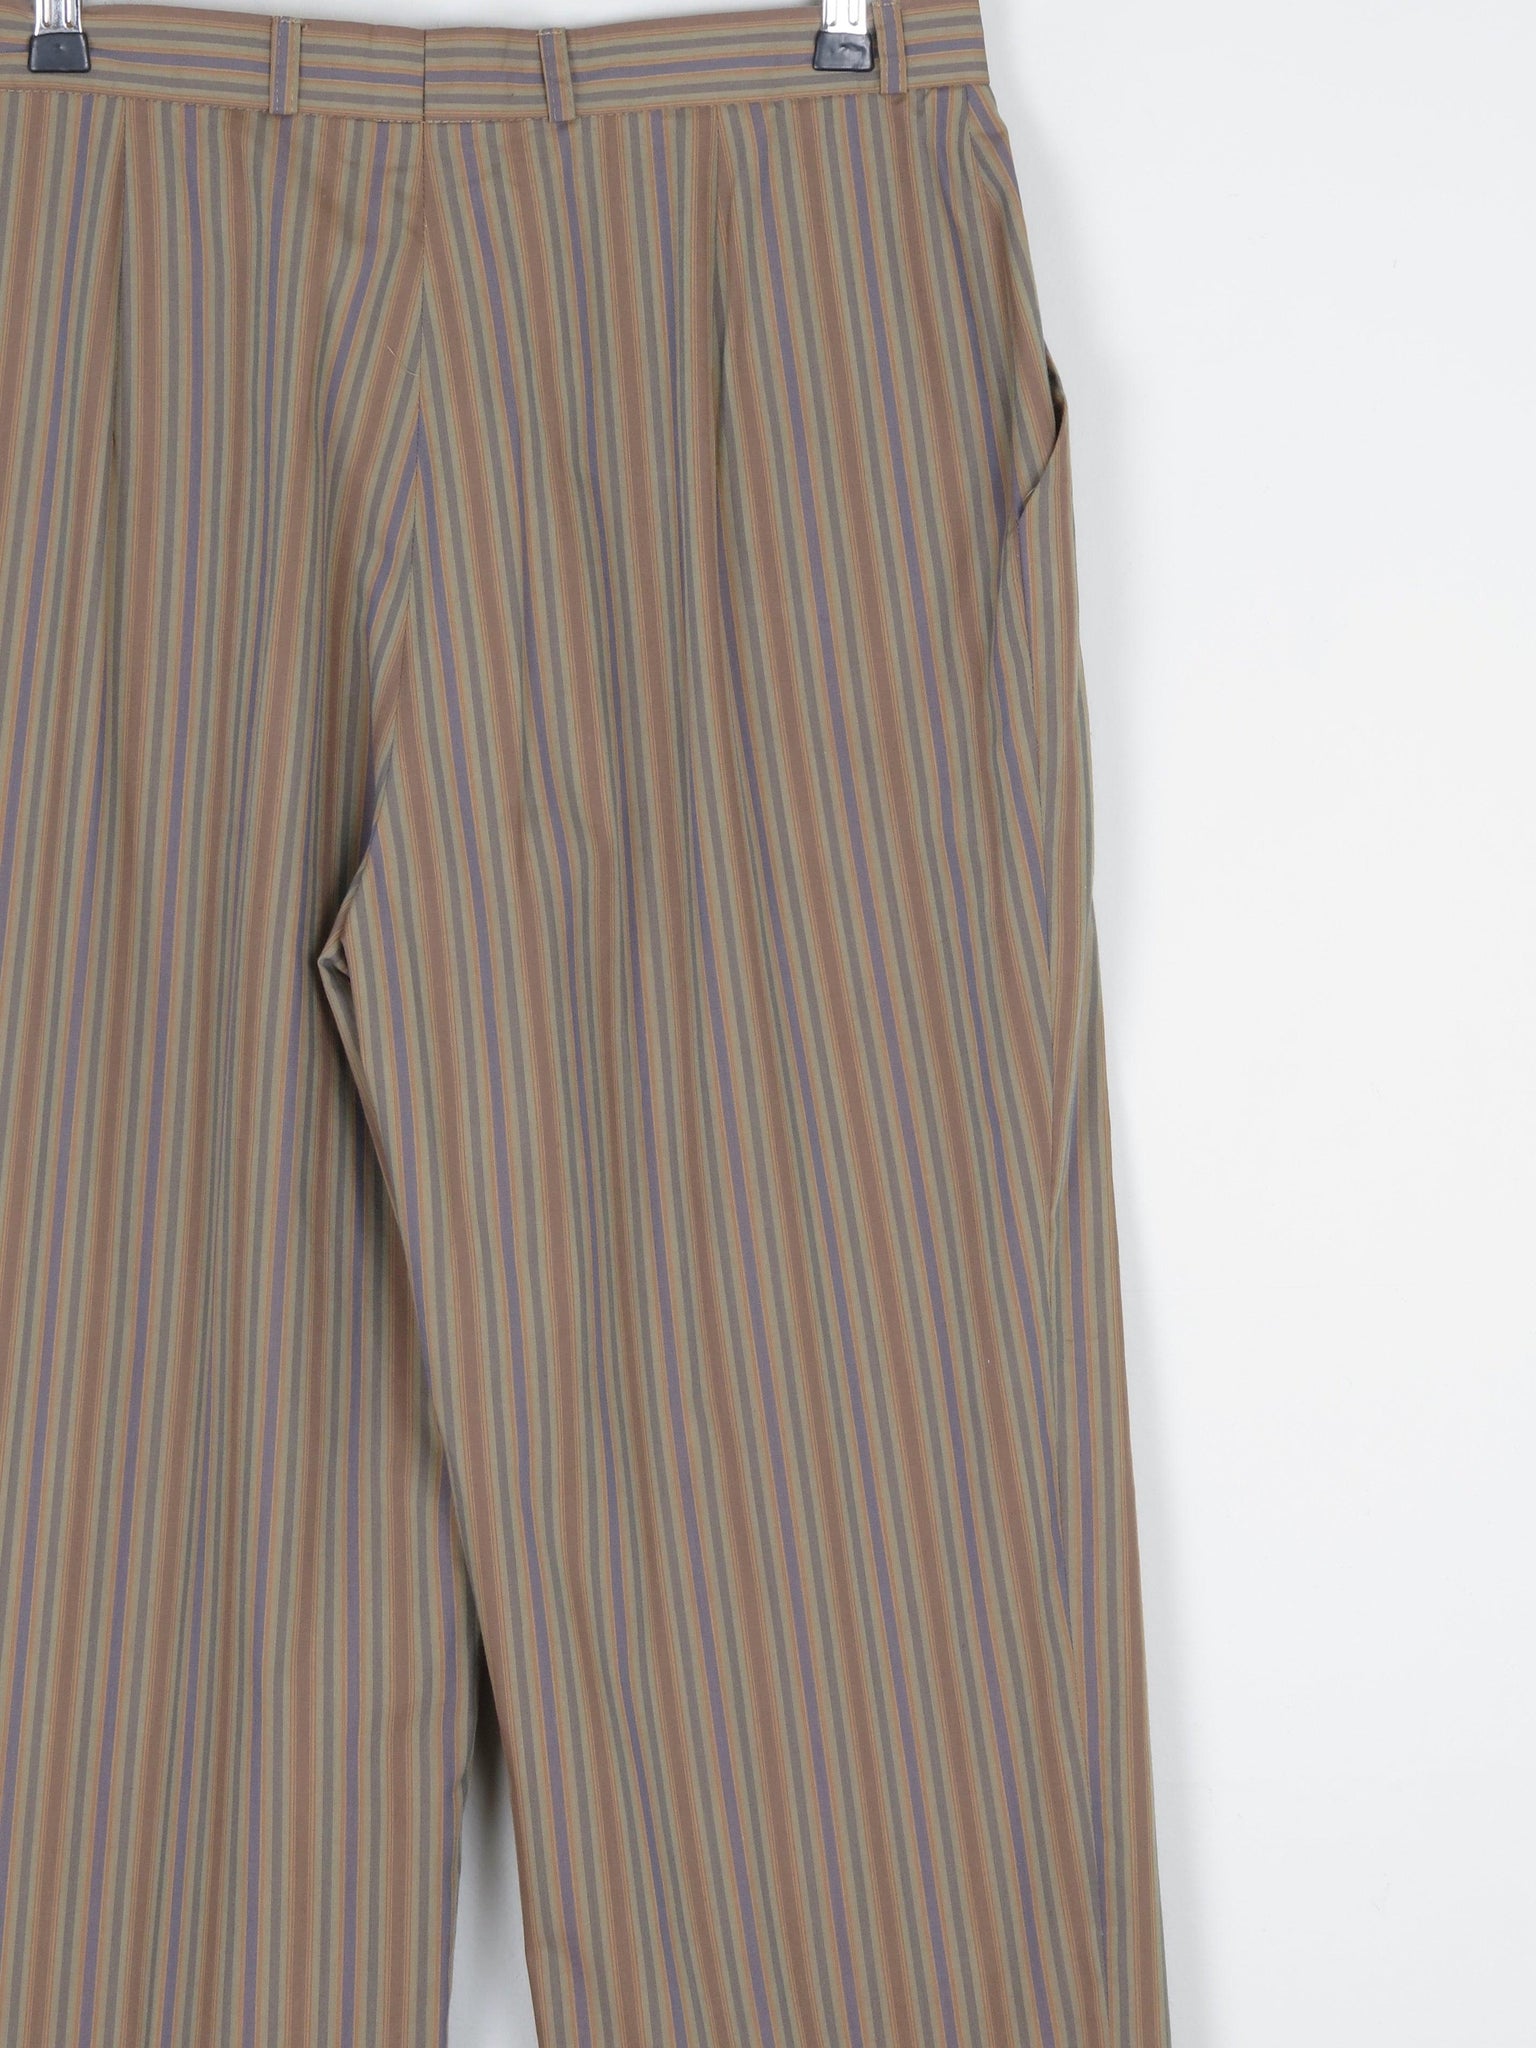 Women's Light Brown Striped Cotton Trousers 28" S - The Harlequin